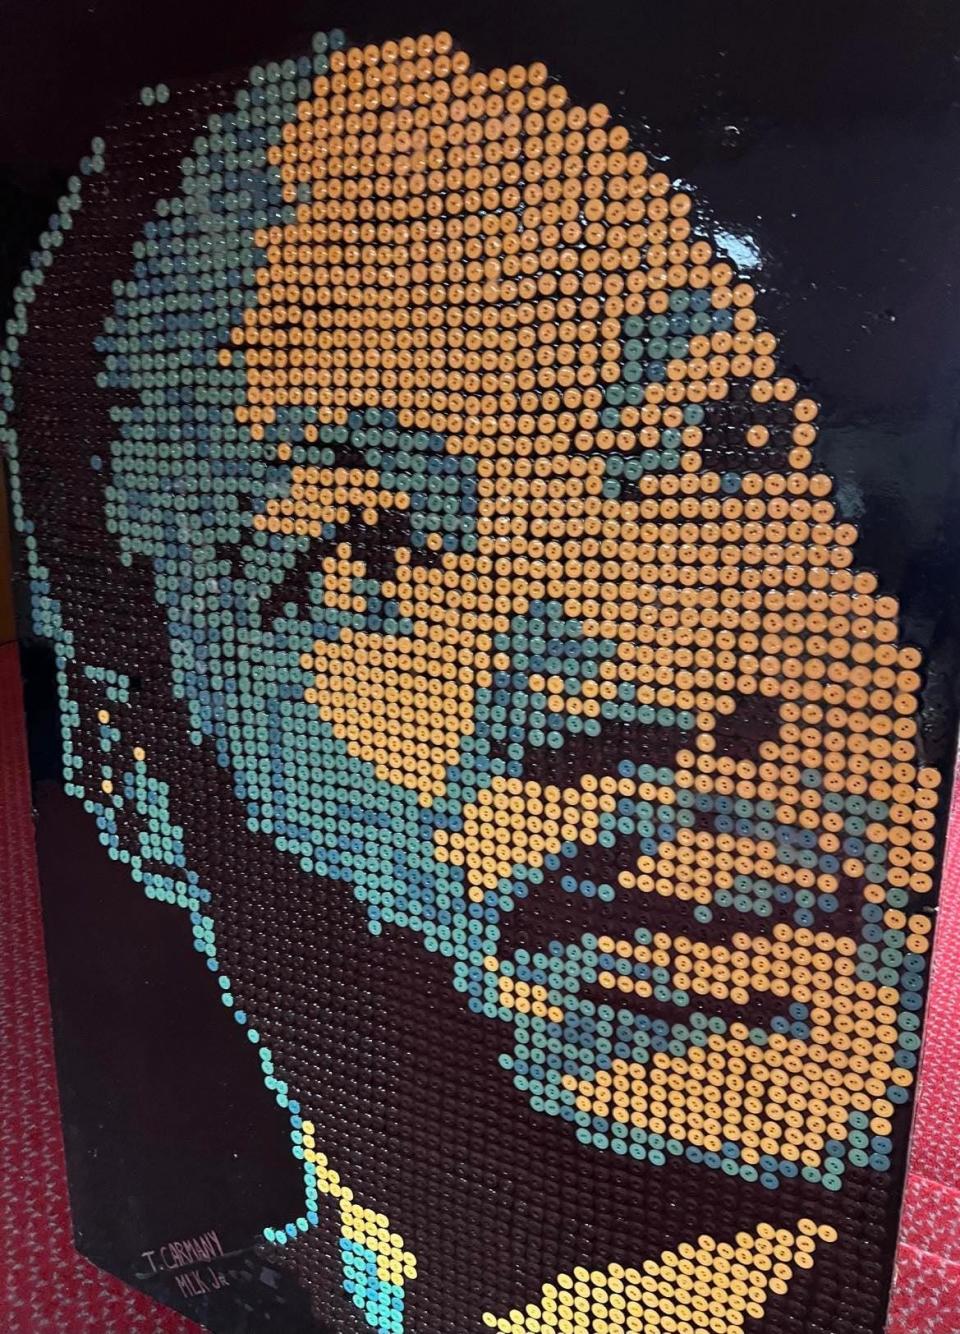 ArtsinStark has donated a portrait of Martin Luther King Jr. to McKinley High School. Local artist Tim Carmany created art piece from roughly 1,000 buttons.